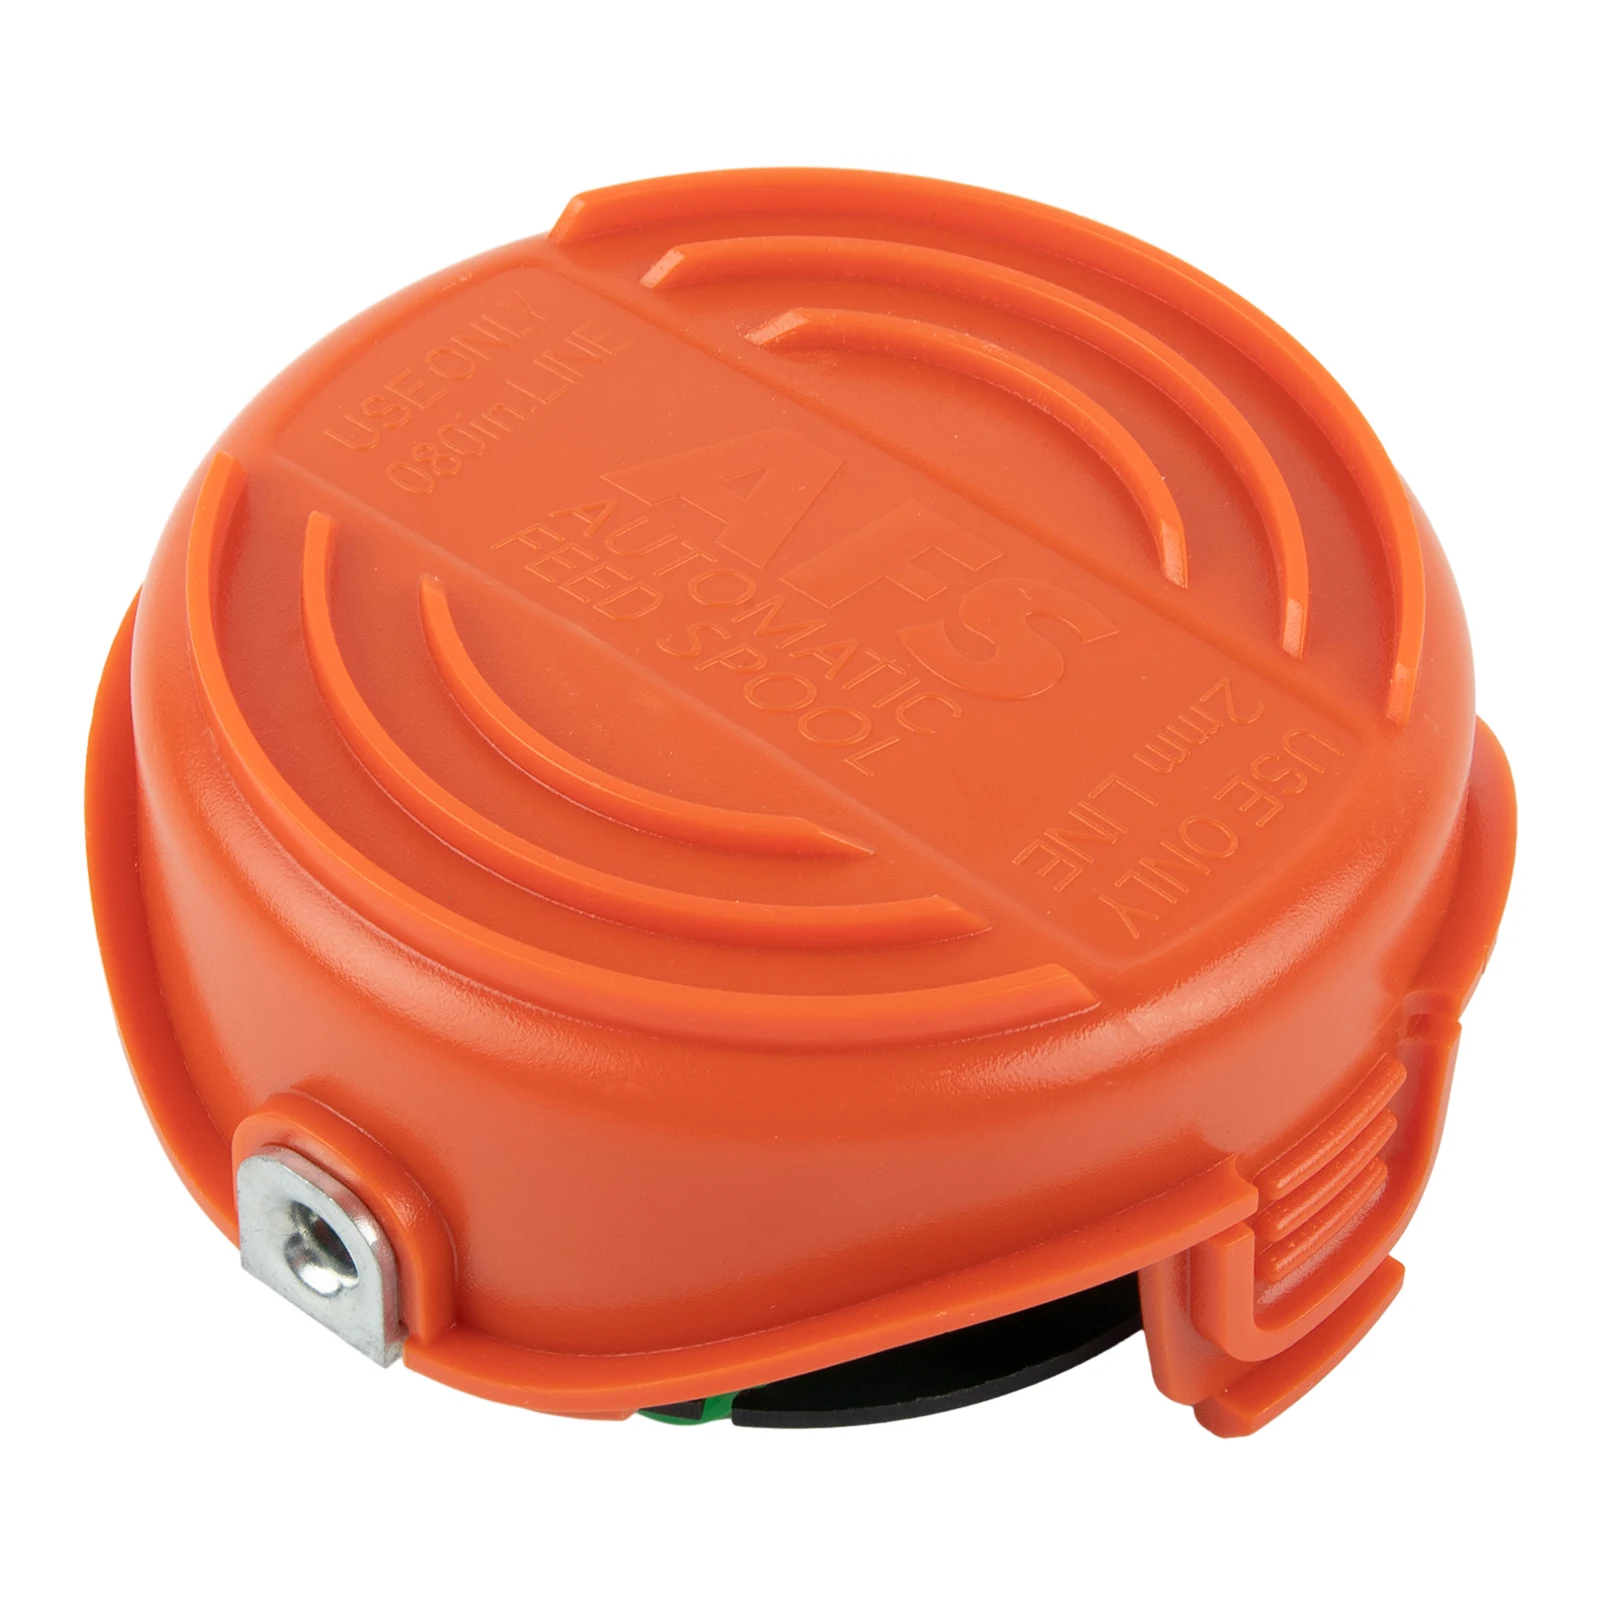 

Brand New Spool Cap Lawn Mower Parts Long Service Life Solid Delicate Easy To Install Exquisite For Black & Decker